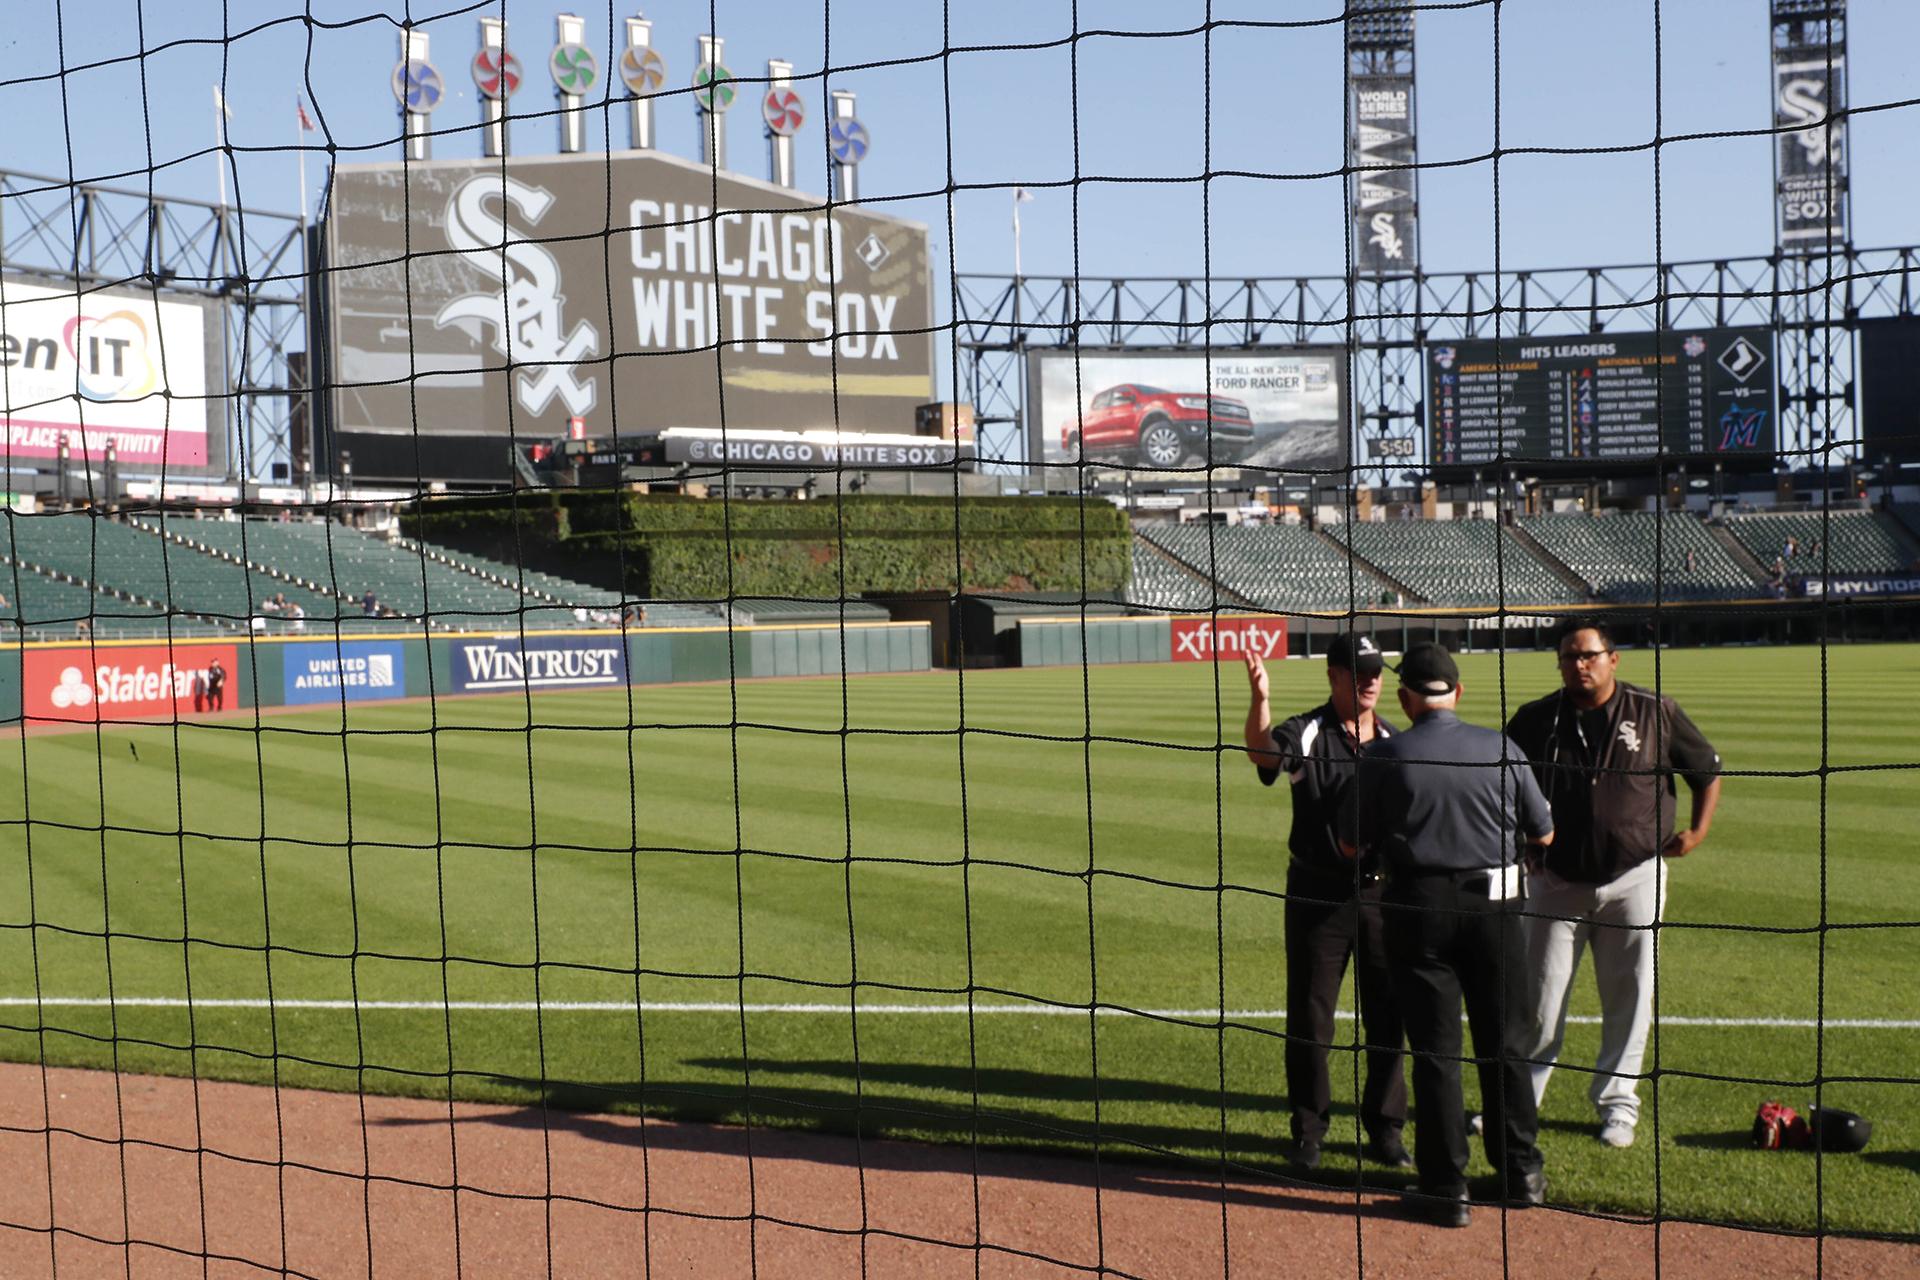 Security personnel at Guaranteed Rate Field are viewed through the newly extended protective netting along left field before a baseball game between the Miami Marlins and the Chicago White Sox, Monday, July 22, 2019, in Chicago. (AP Photo / Charles Rex Arbogast)